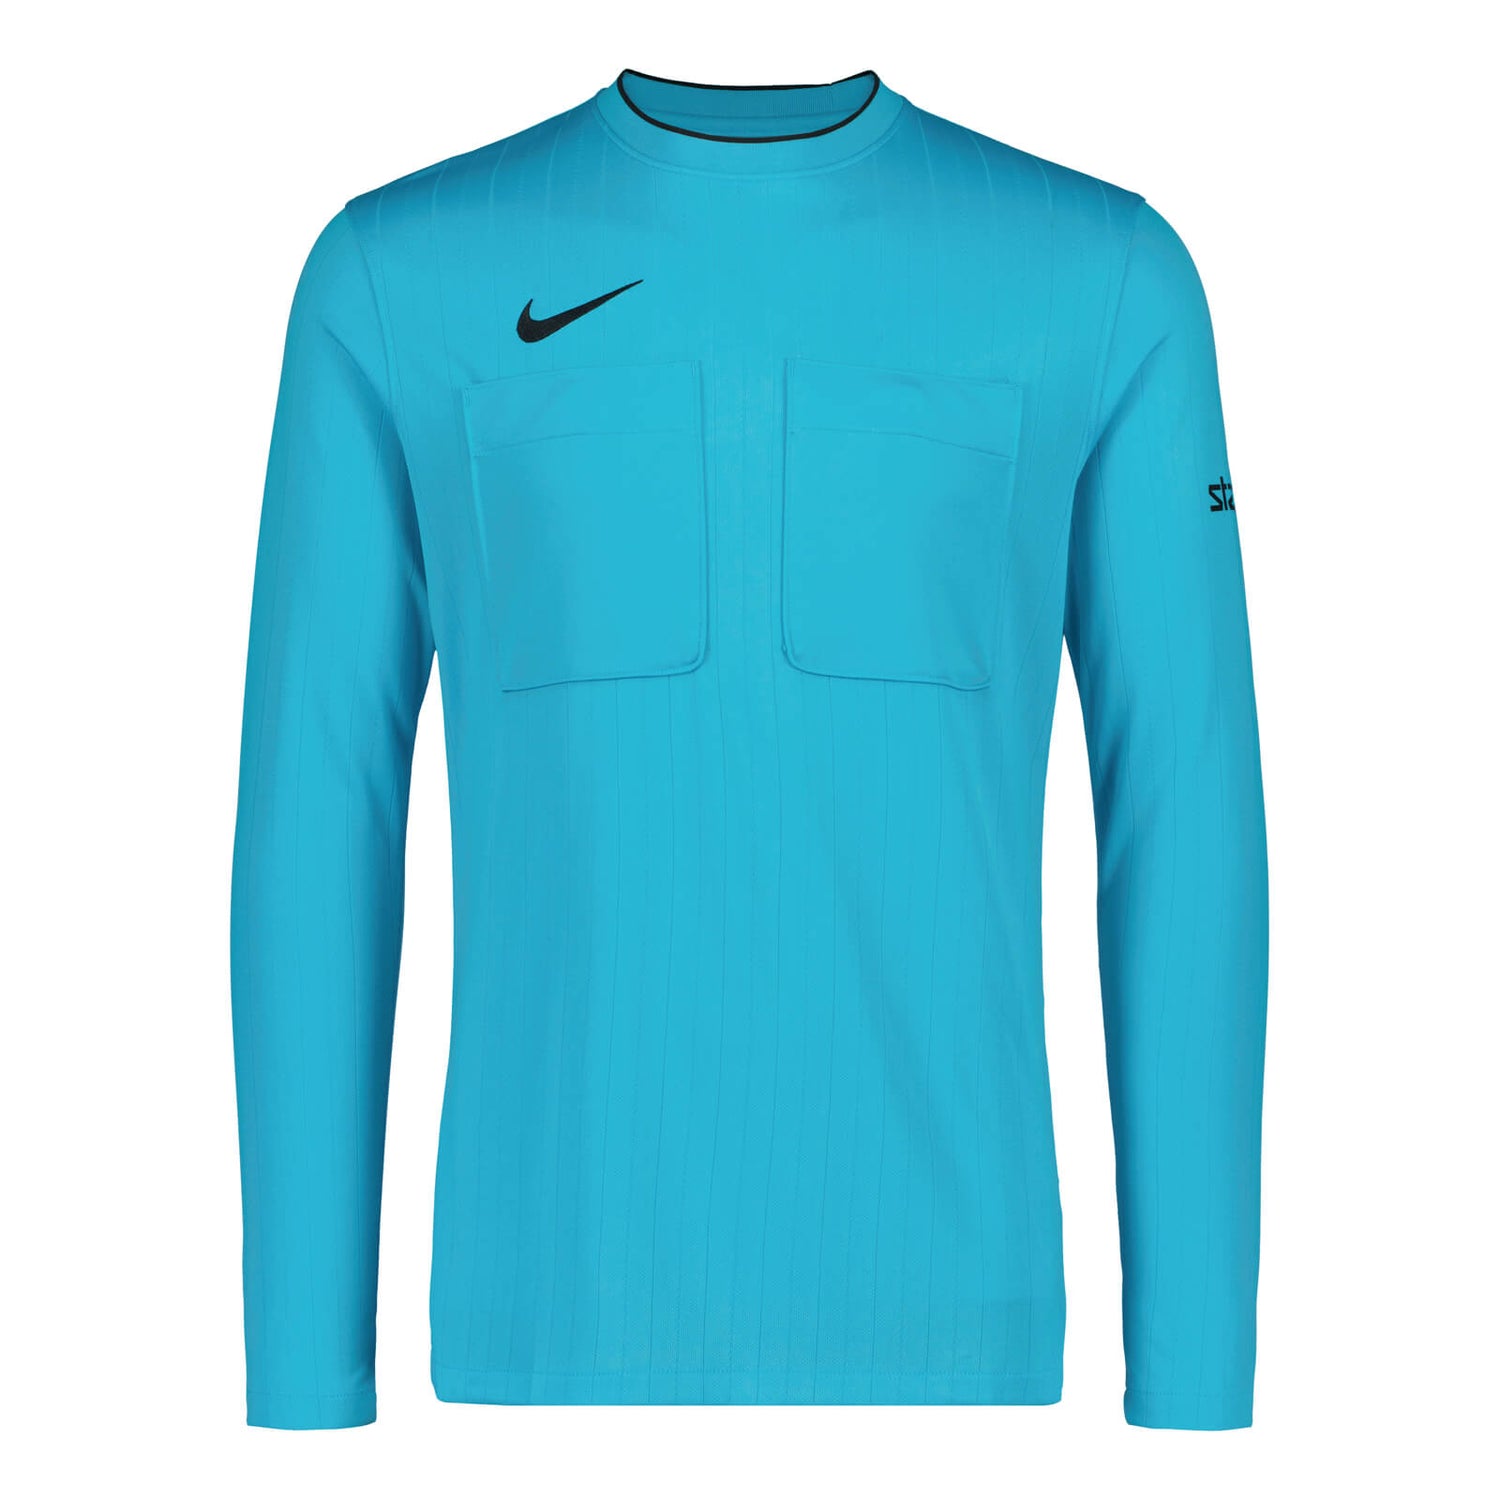 Referee's long-sleeved shirt + referee badge, Turquoise